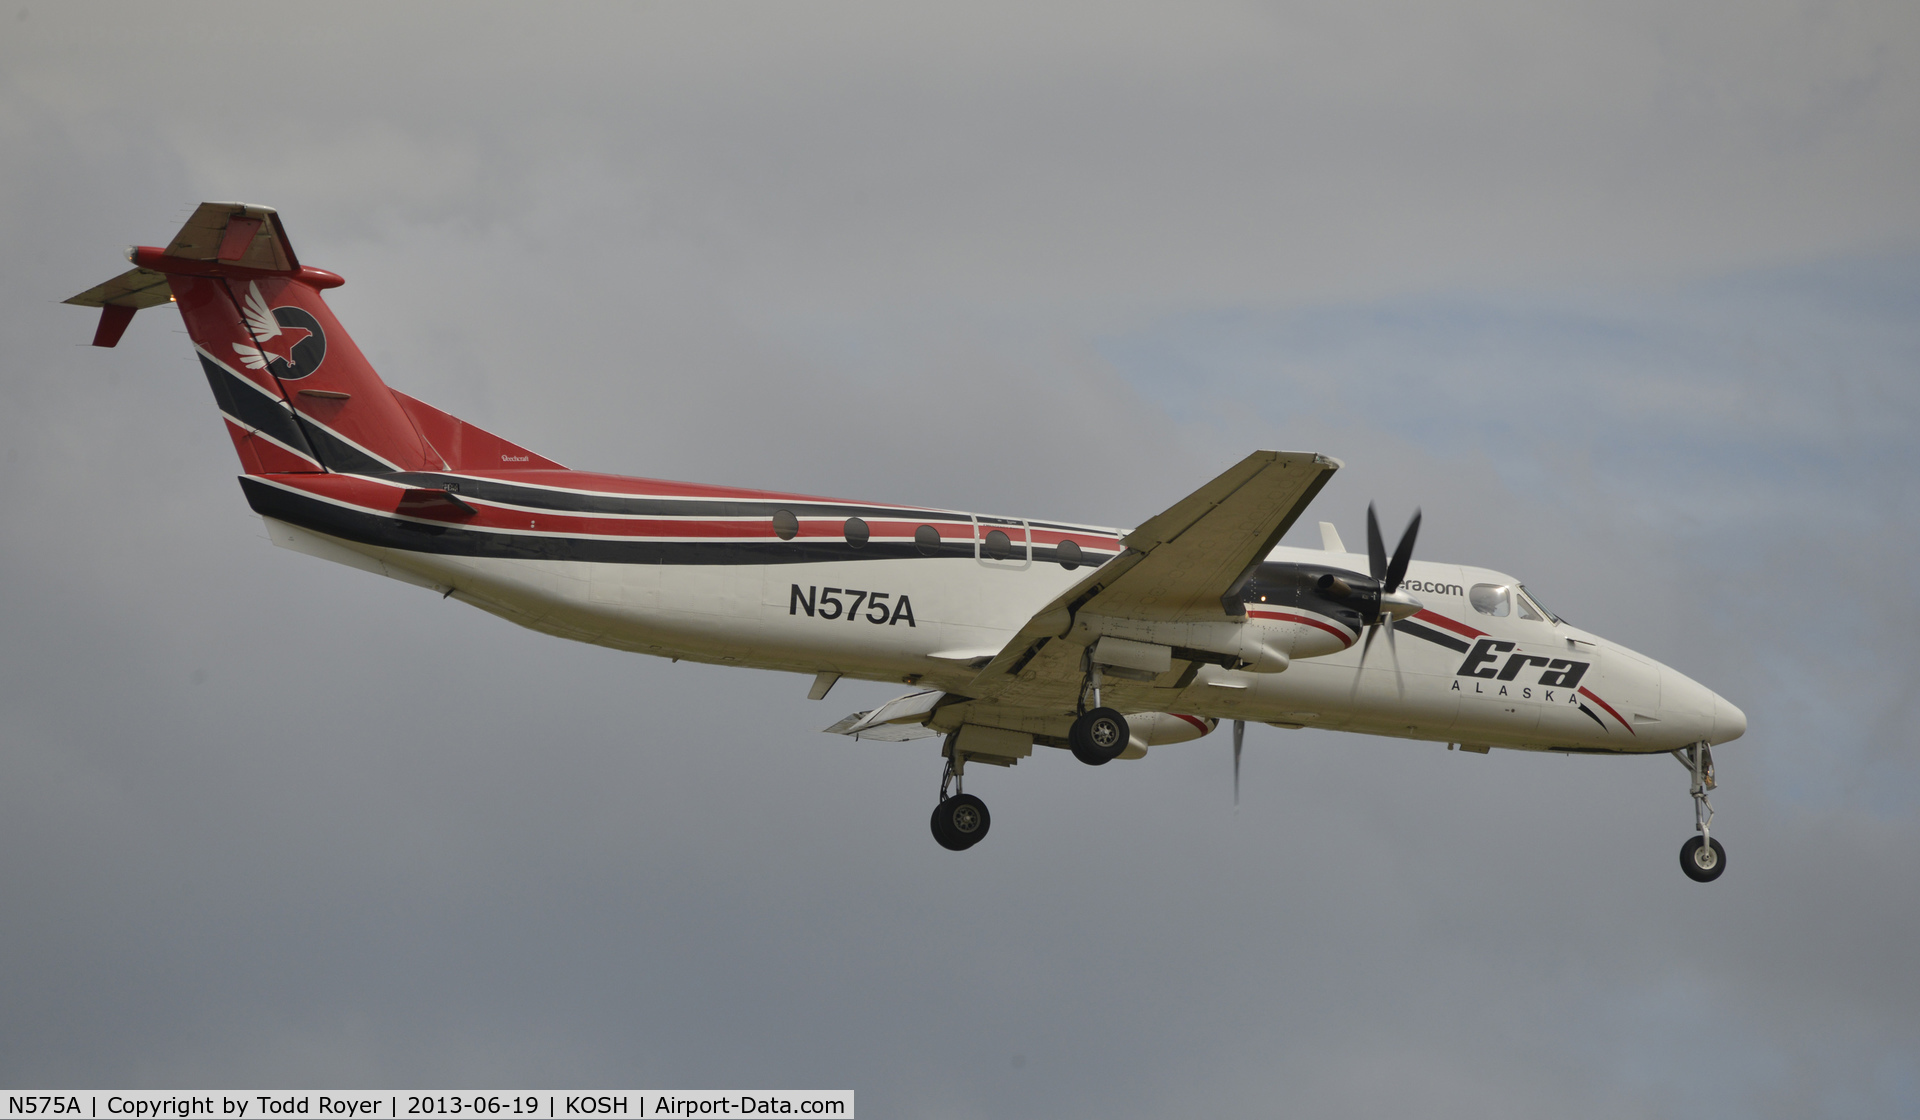 N575A, 1989 Beech 1900C C/N UC-83, Arriving at Anchorage